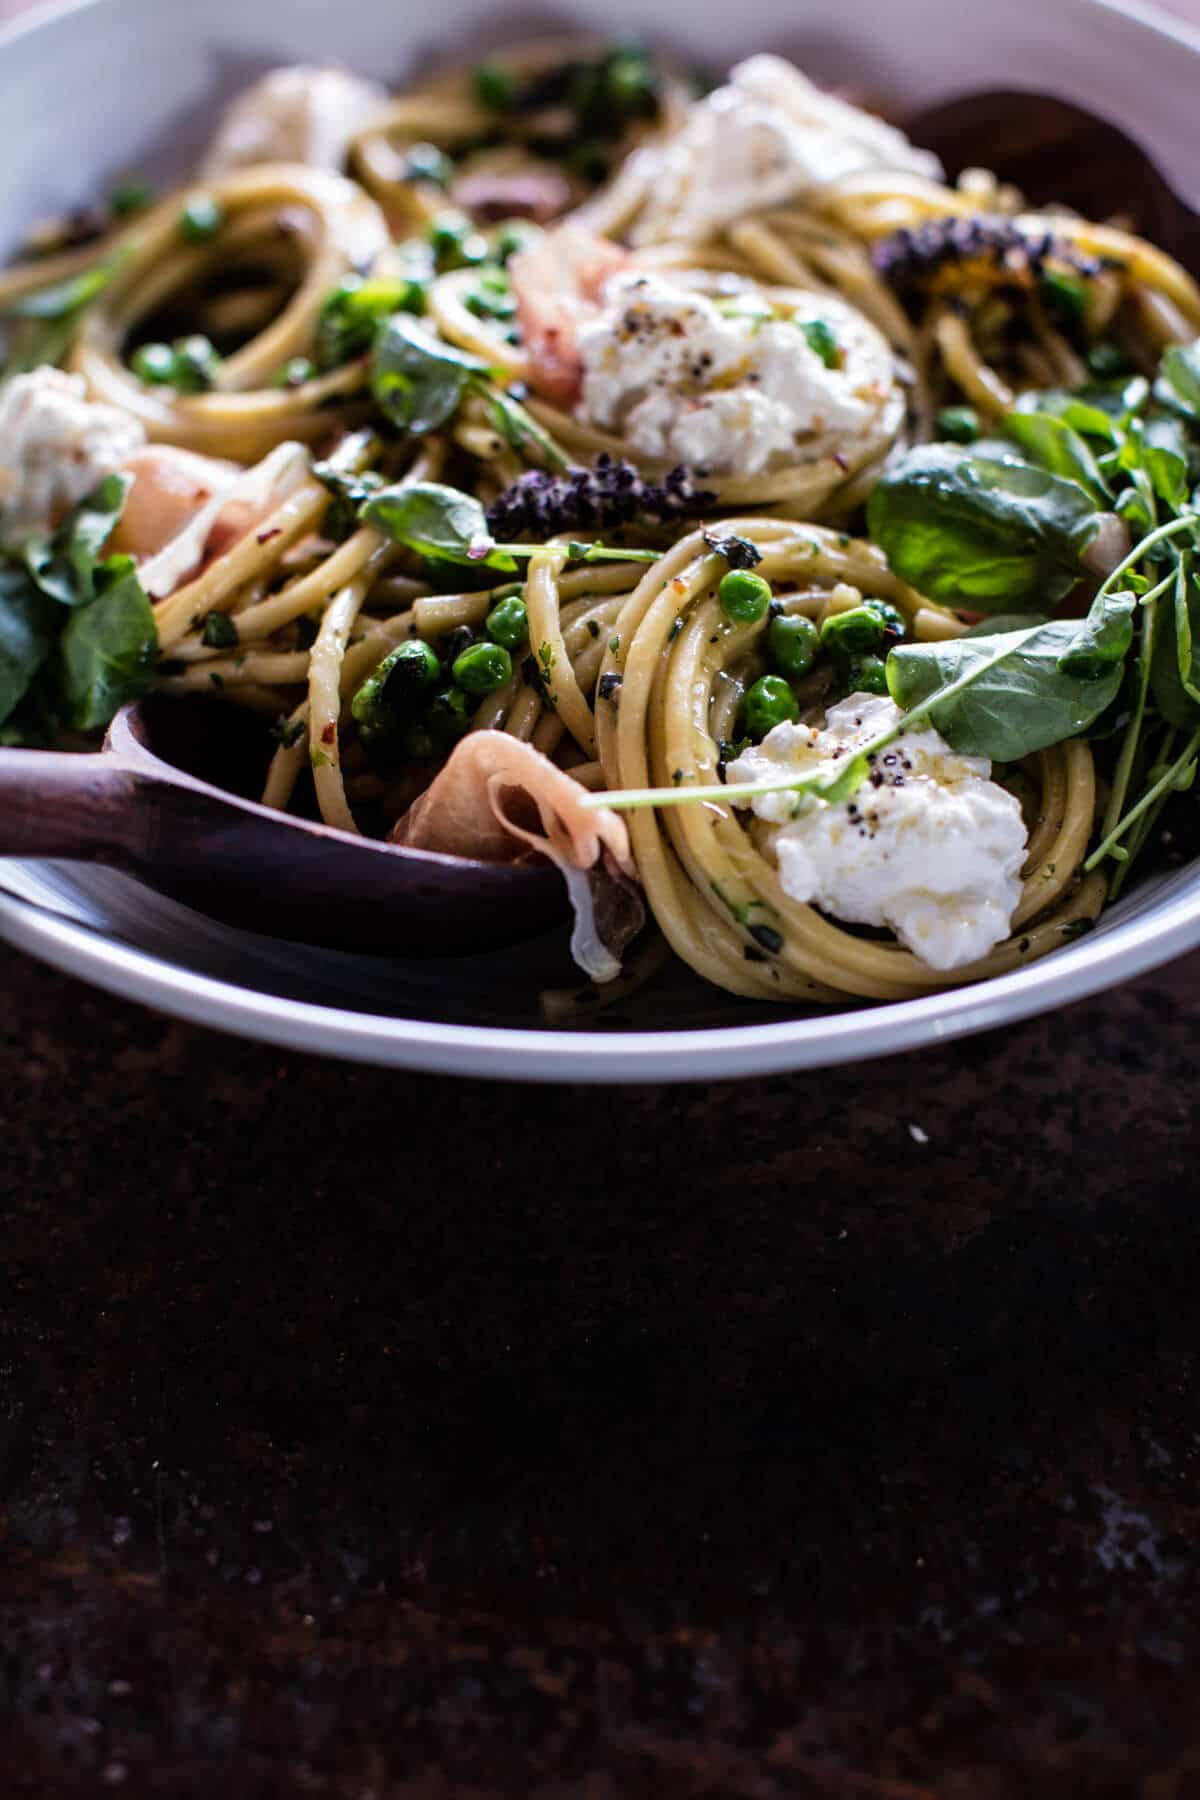 Simple Buttery Spring Pea and Burrata Pasta with Prosciutto | halfbakedharvest.com @hbharvest